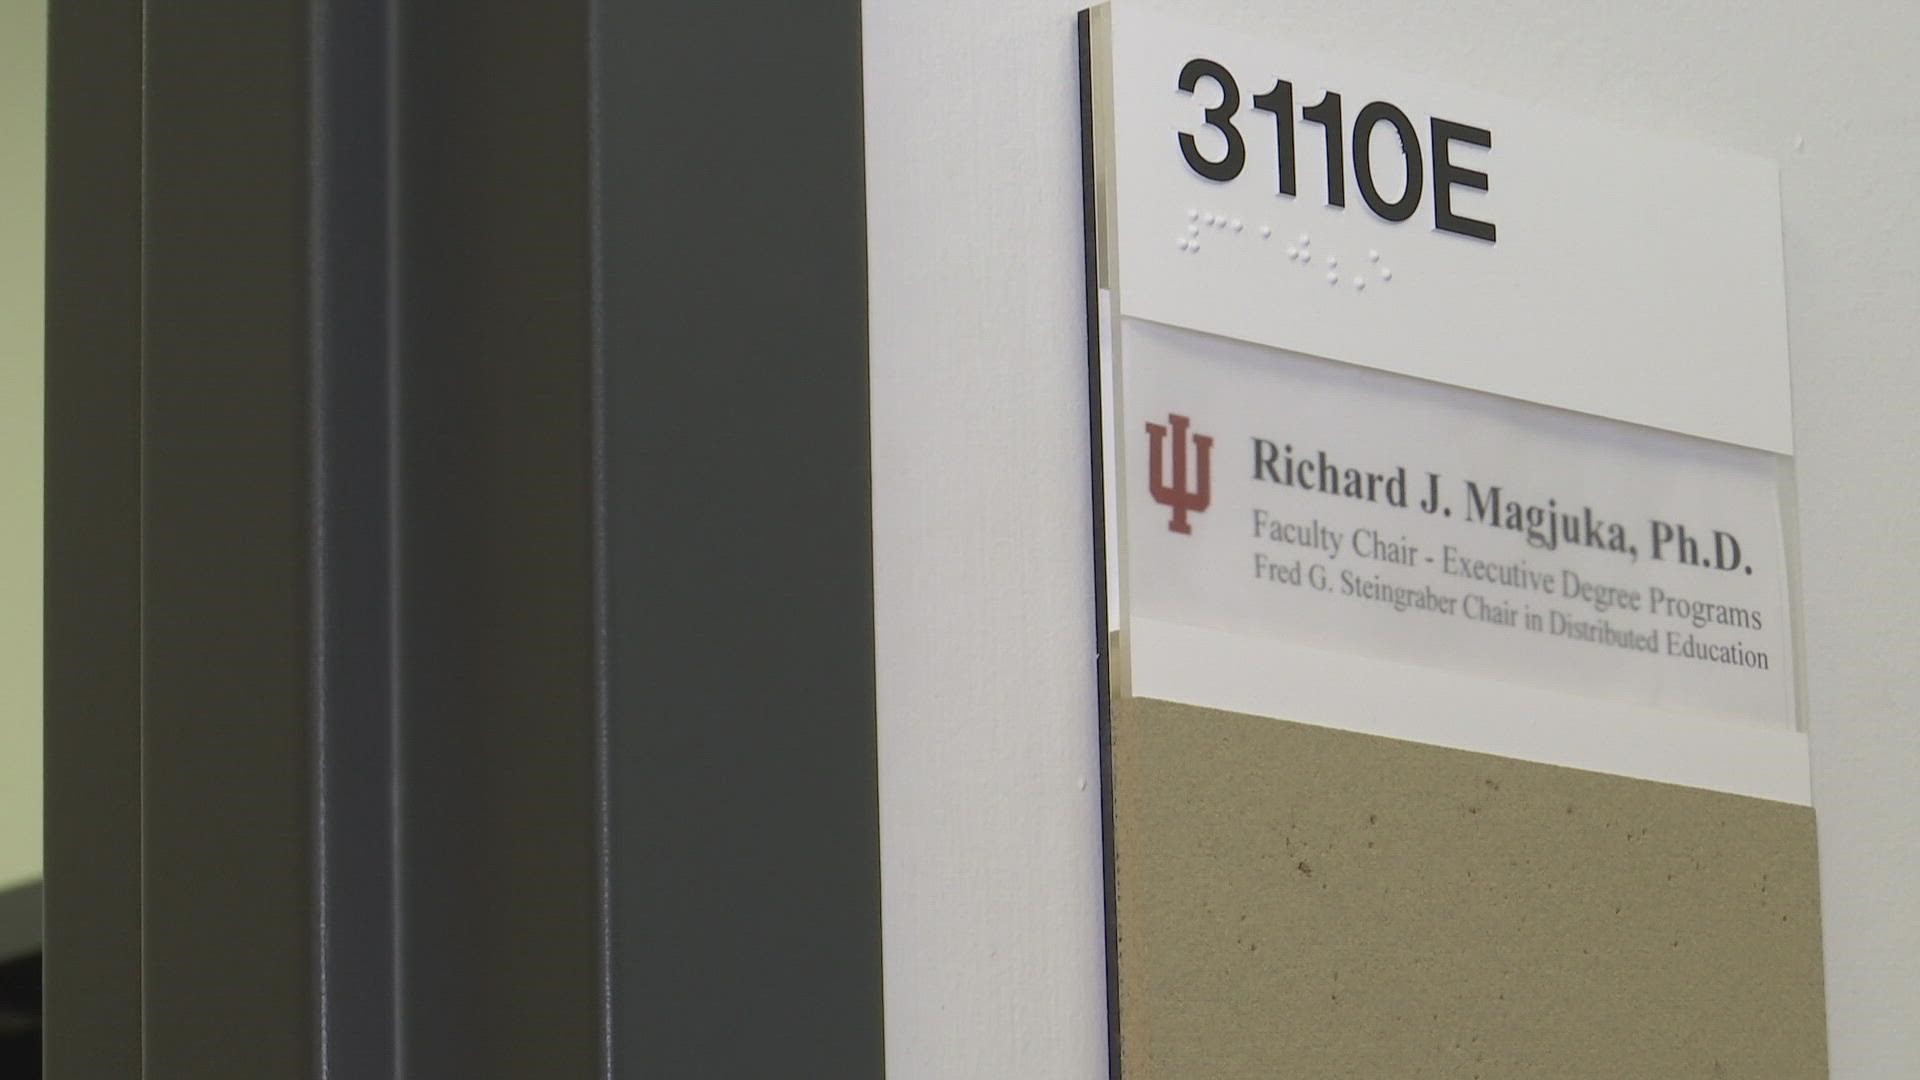 Hoosiers enrolled in IU's MBA program are getting ready to welcome new classmates. But they're not just any classmates.